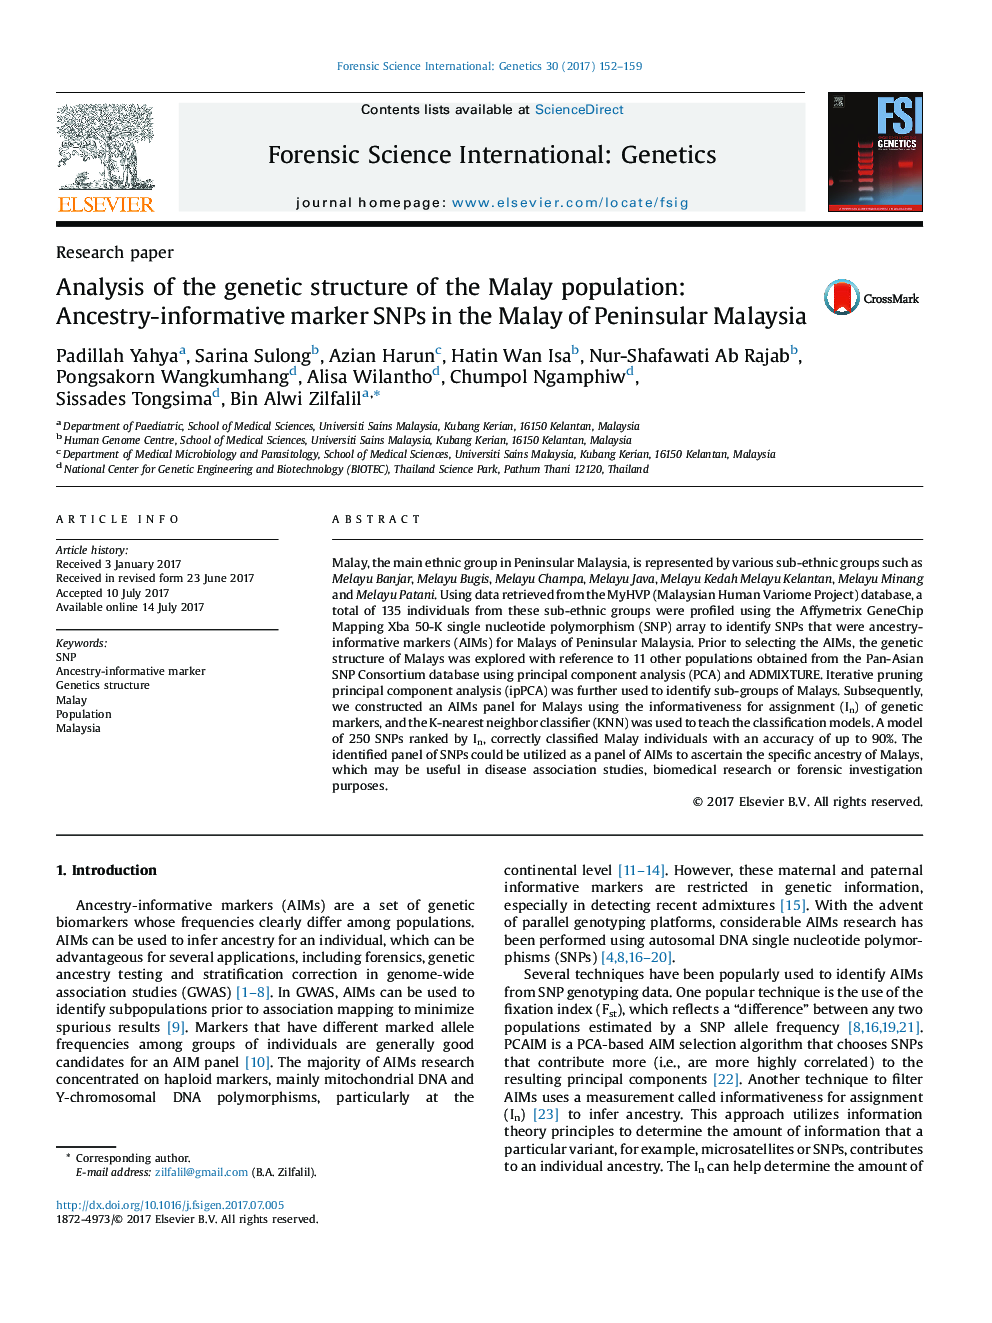 Analysis of the genetic structure of the Malay population: Ancestry-informative marker SNPs in the Malay of Peninsular Malaysia